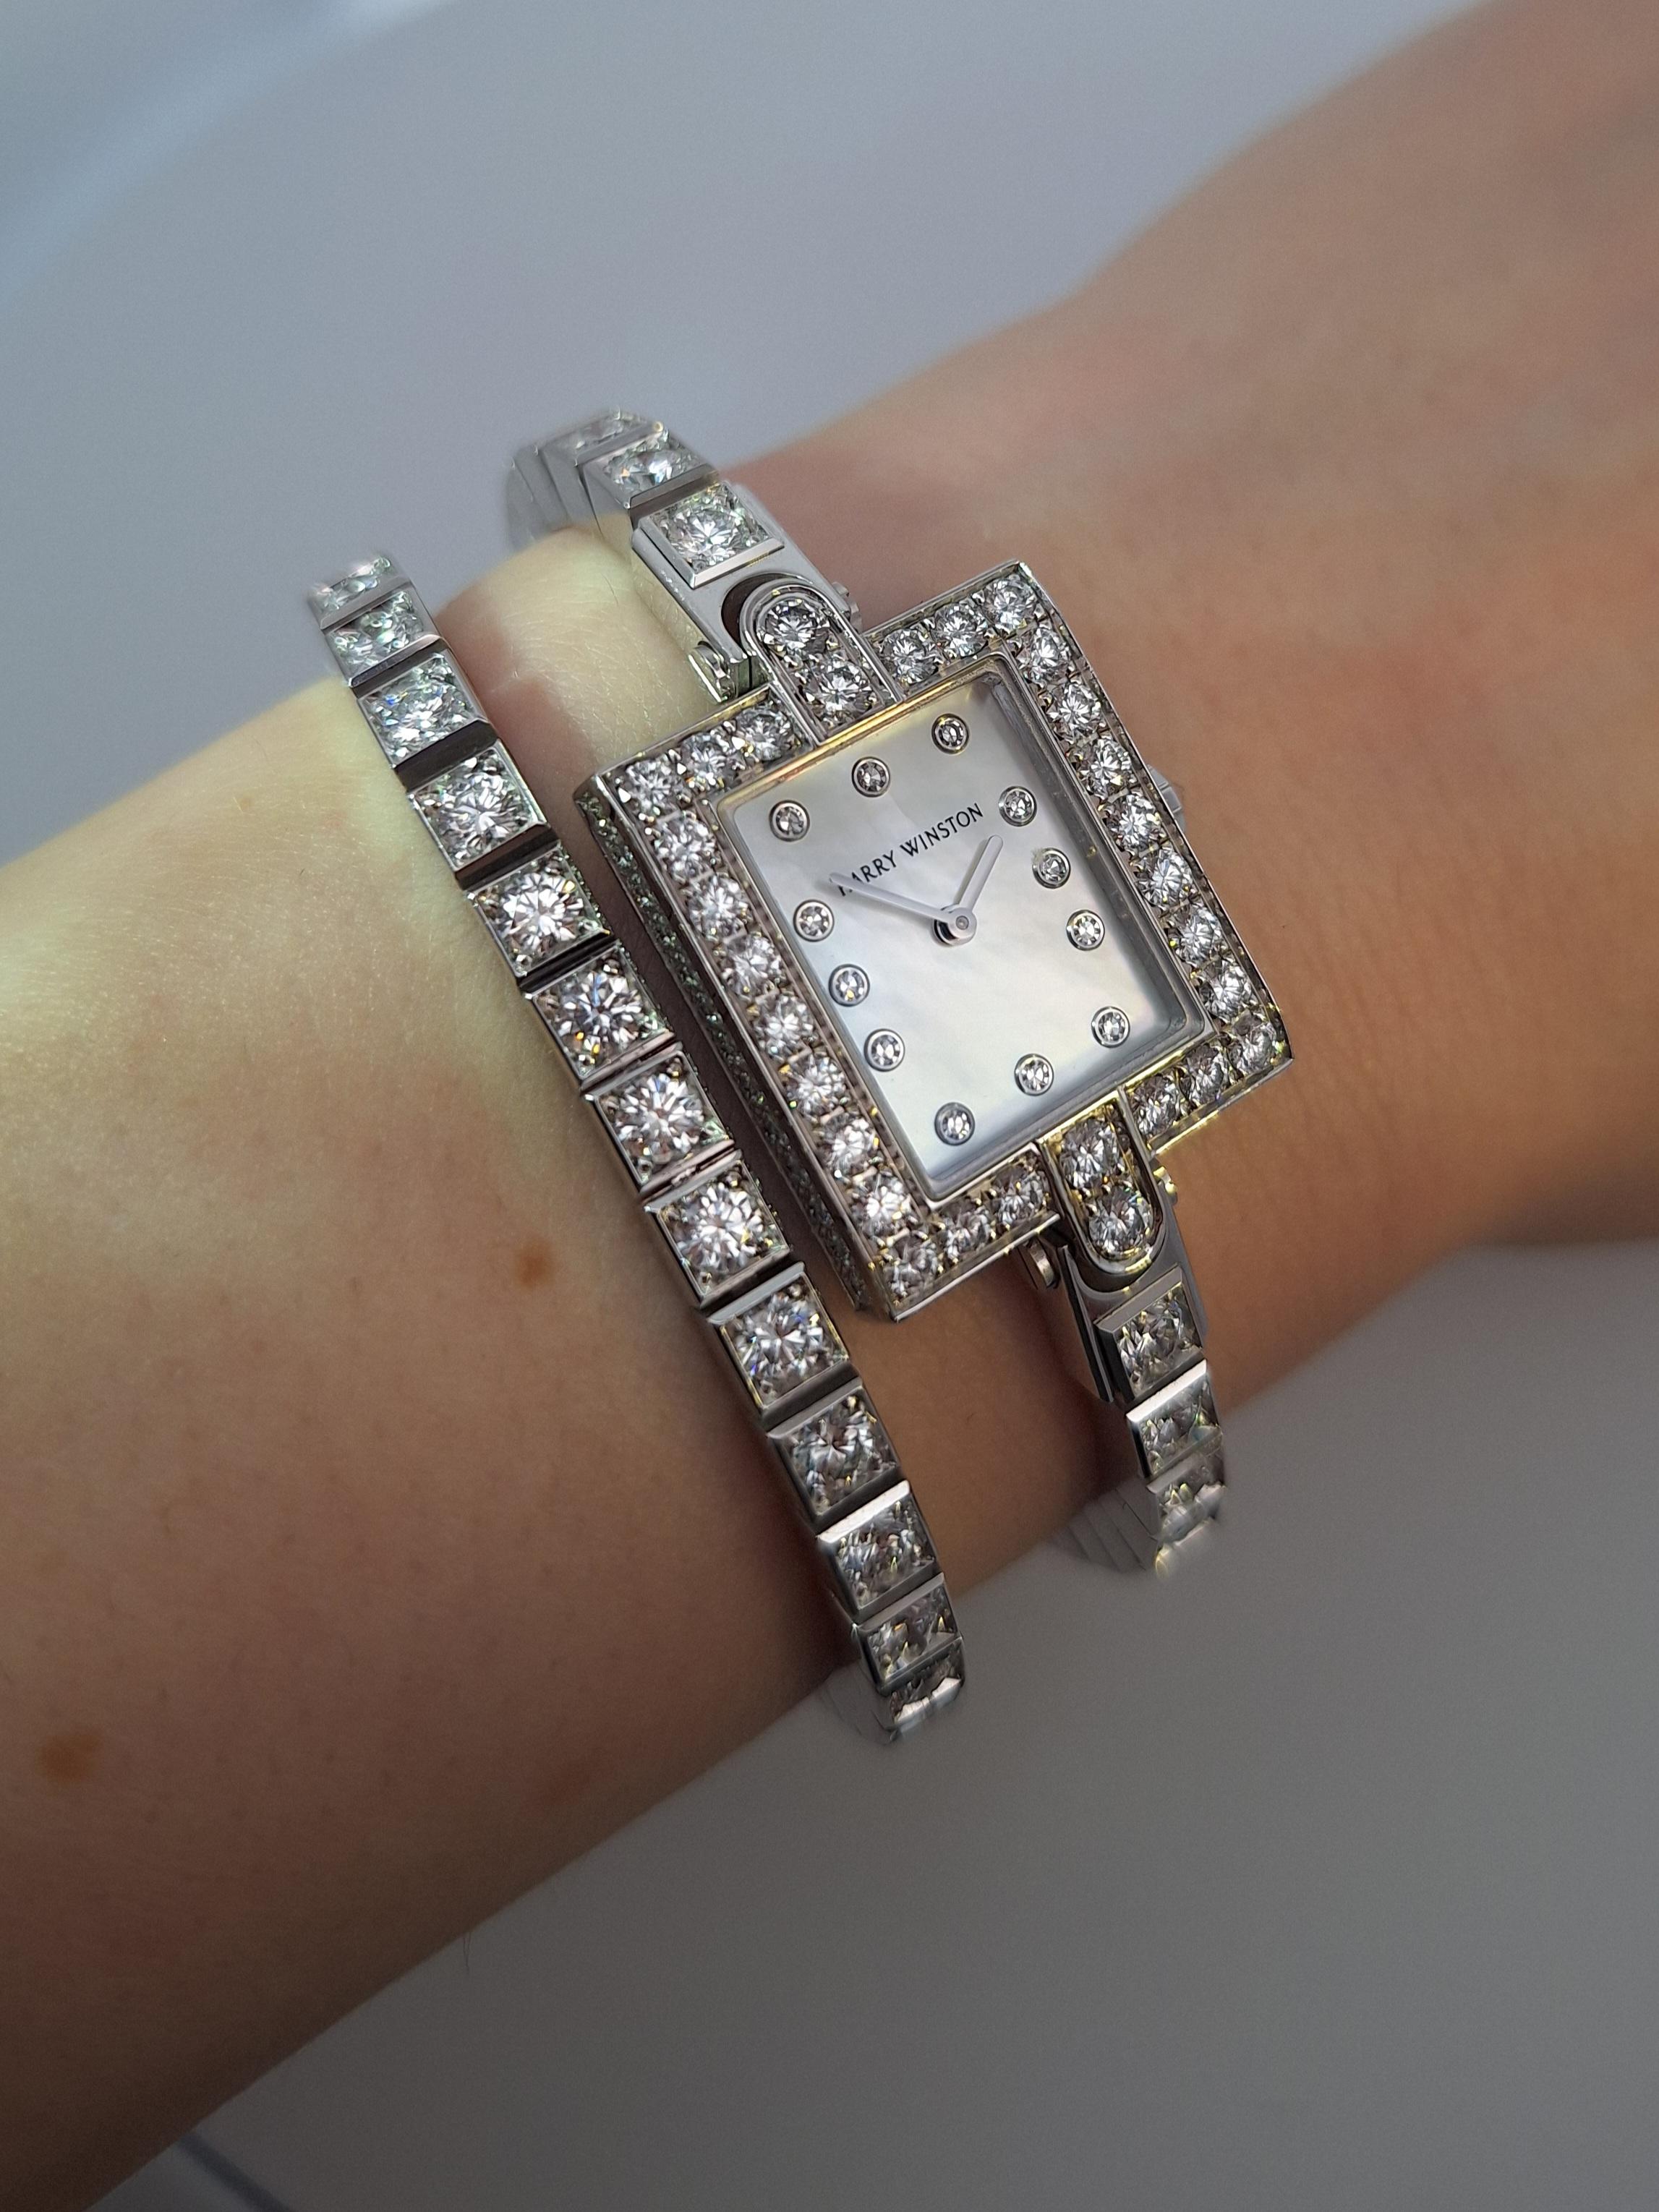 Timeless elegant piece, crafted in 18K white gold with mother of pearl dial, round brilliant cut diamonds weighing approximately 12 carats, F-G color/VS clarity.

Bracelet may be shortened and detachable portion can be worn on its own or you can